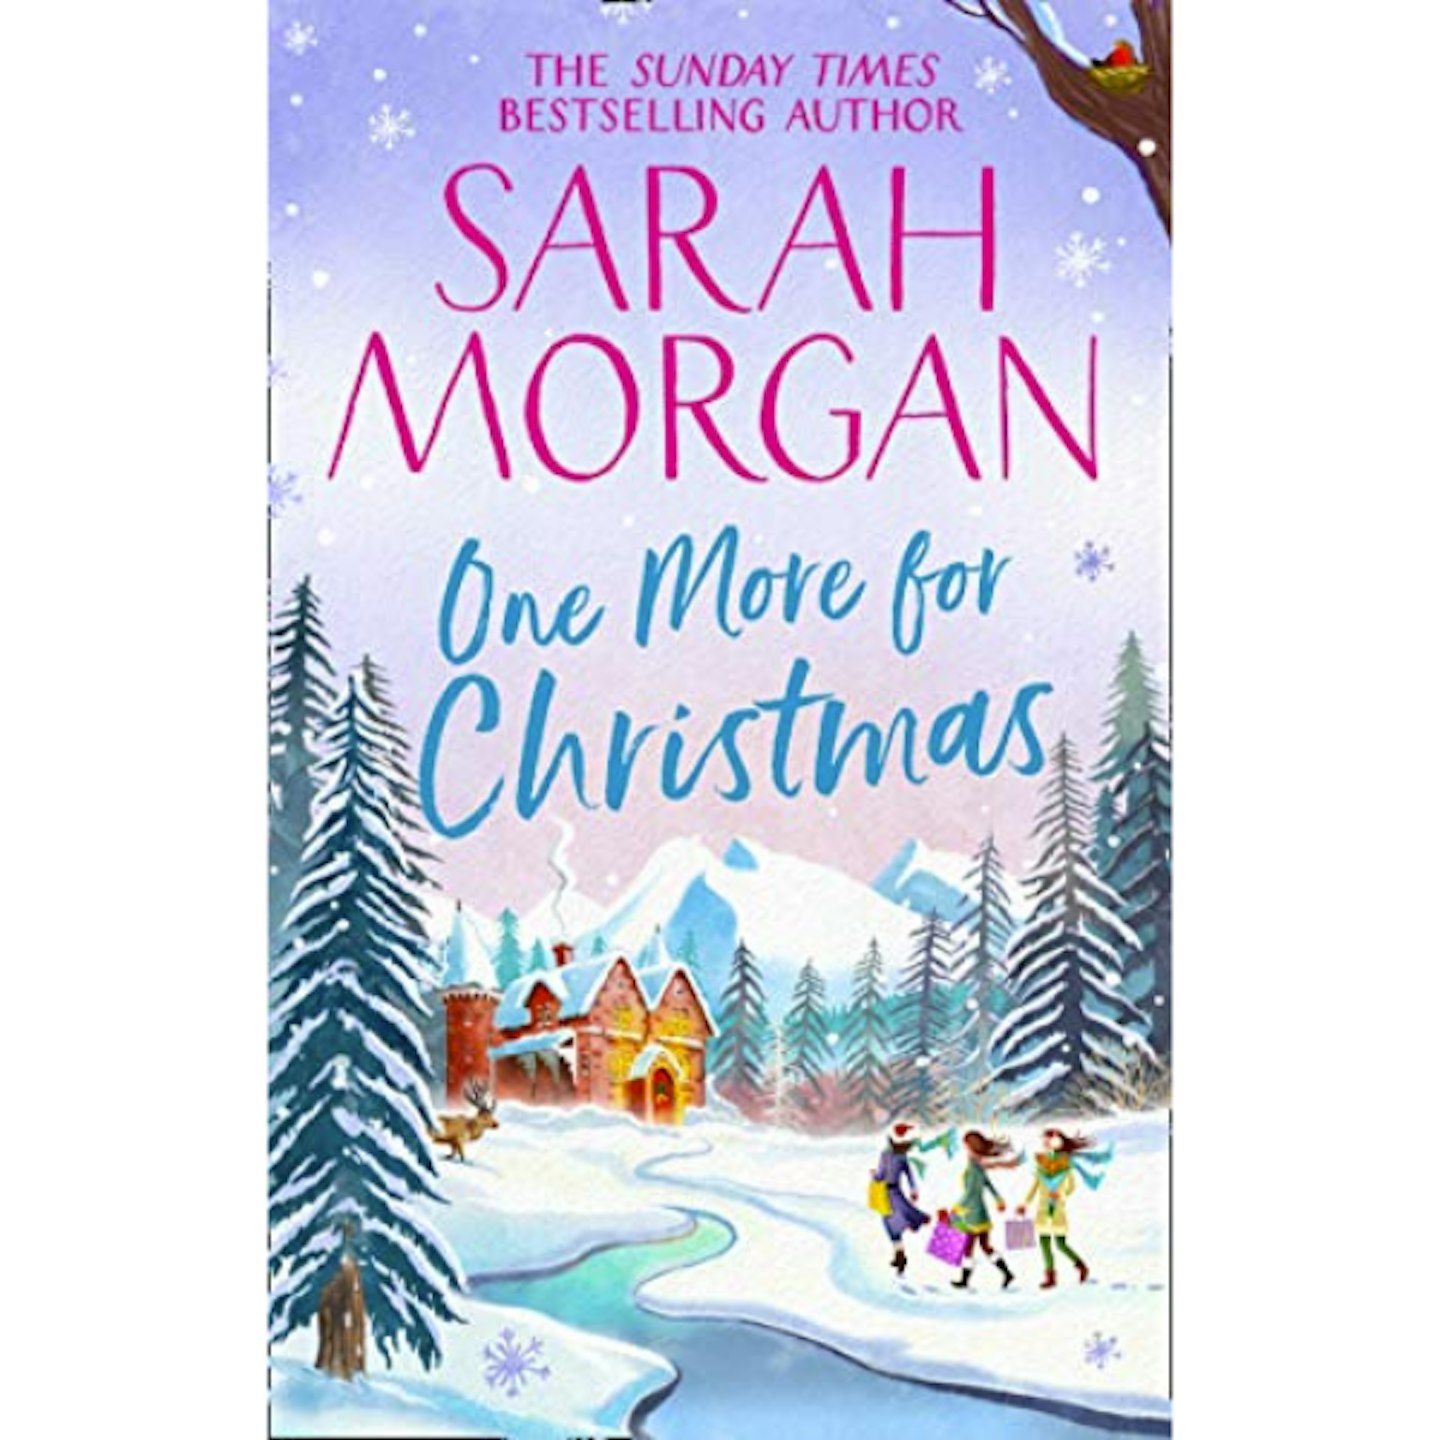 One More For Christmas by Sarah Morgan 